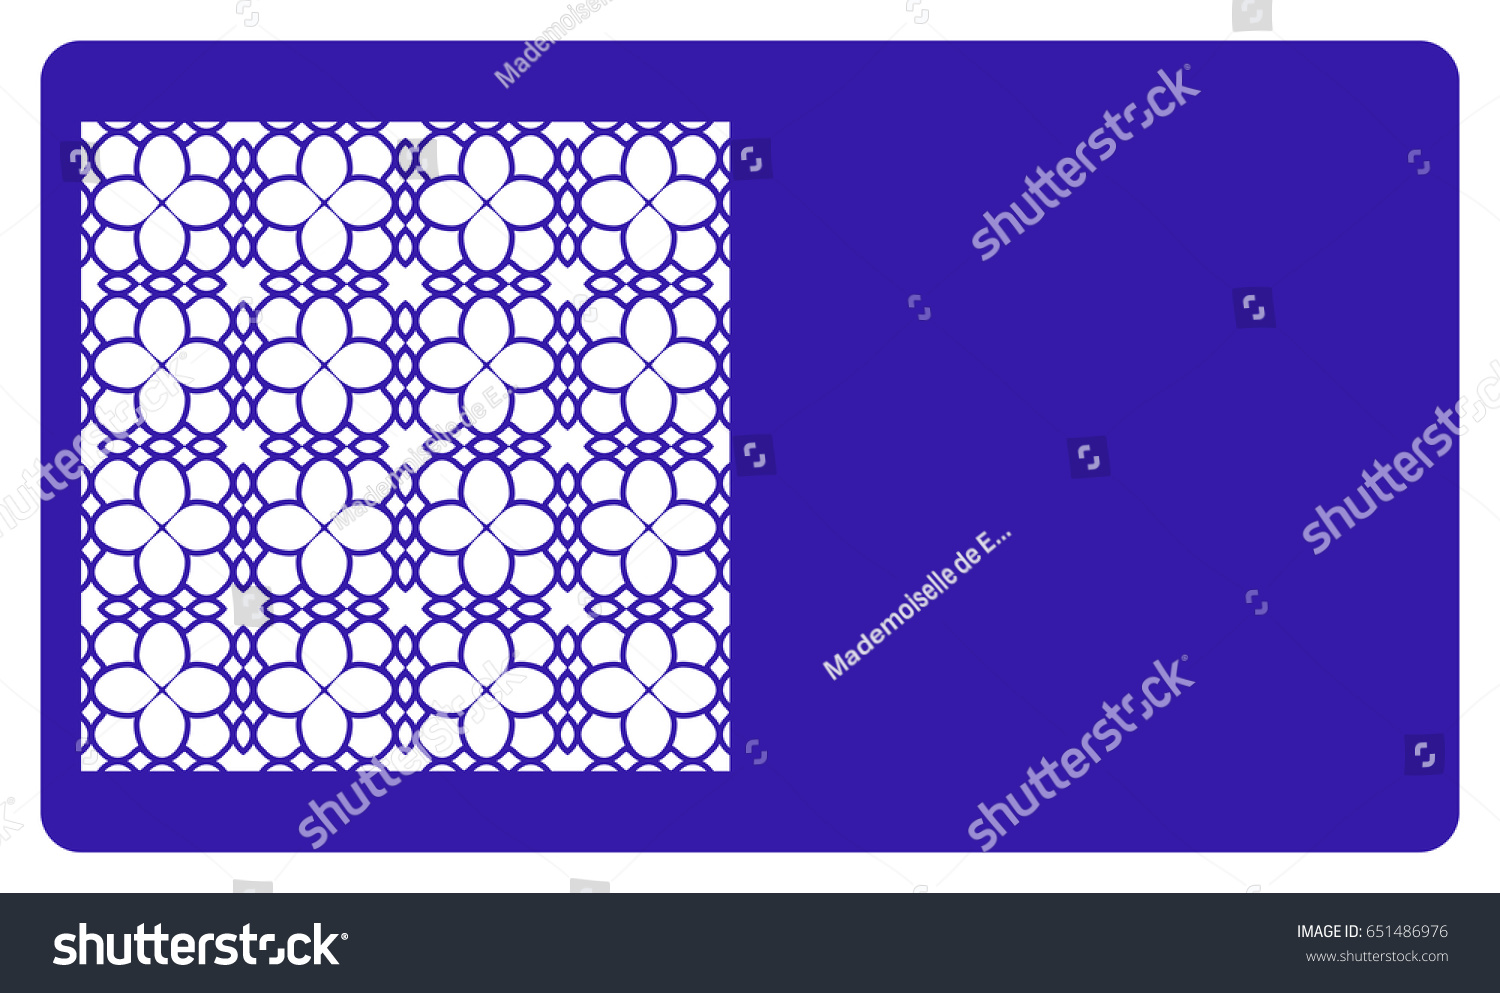 Business card template. Cut out cards with lace pattern. Modern geometric card for laser cutting. Vector illustration. #651486976